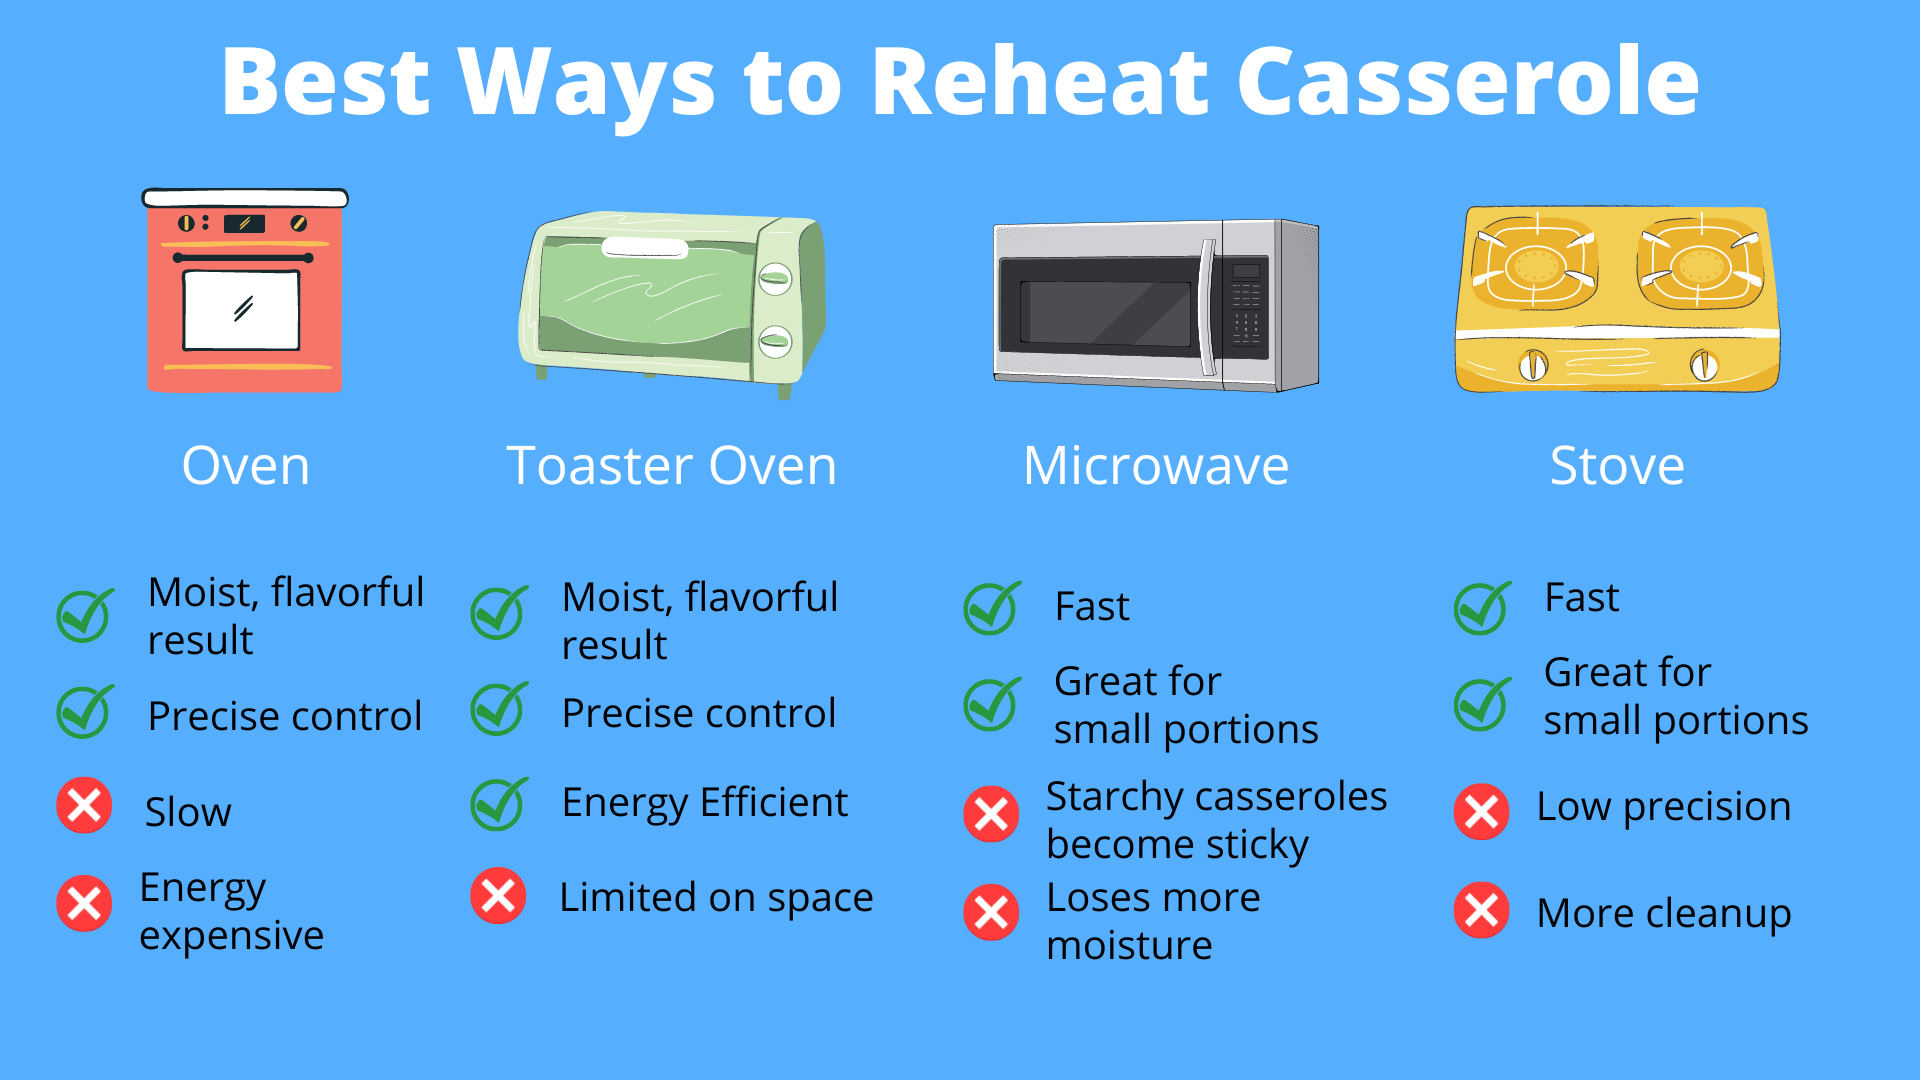 Reheating Casseroles: Optimal Oven Times for Perfect Results